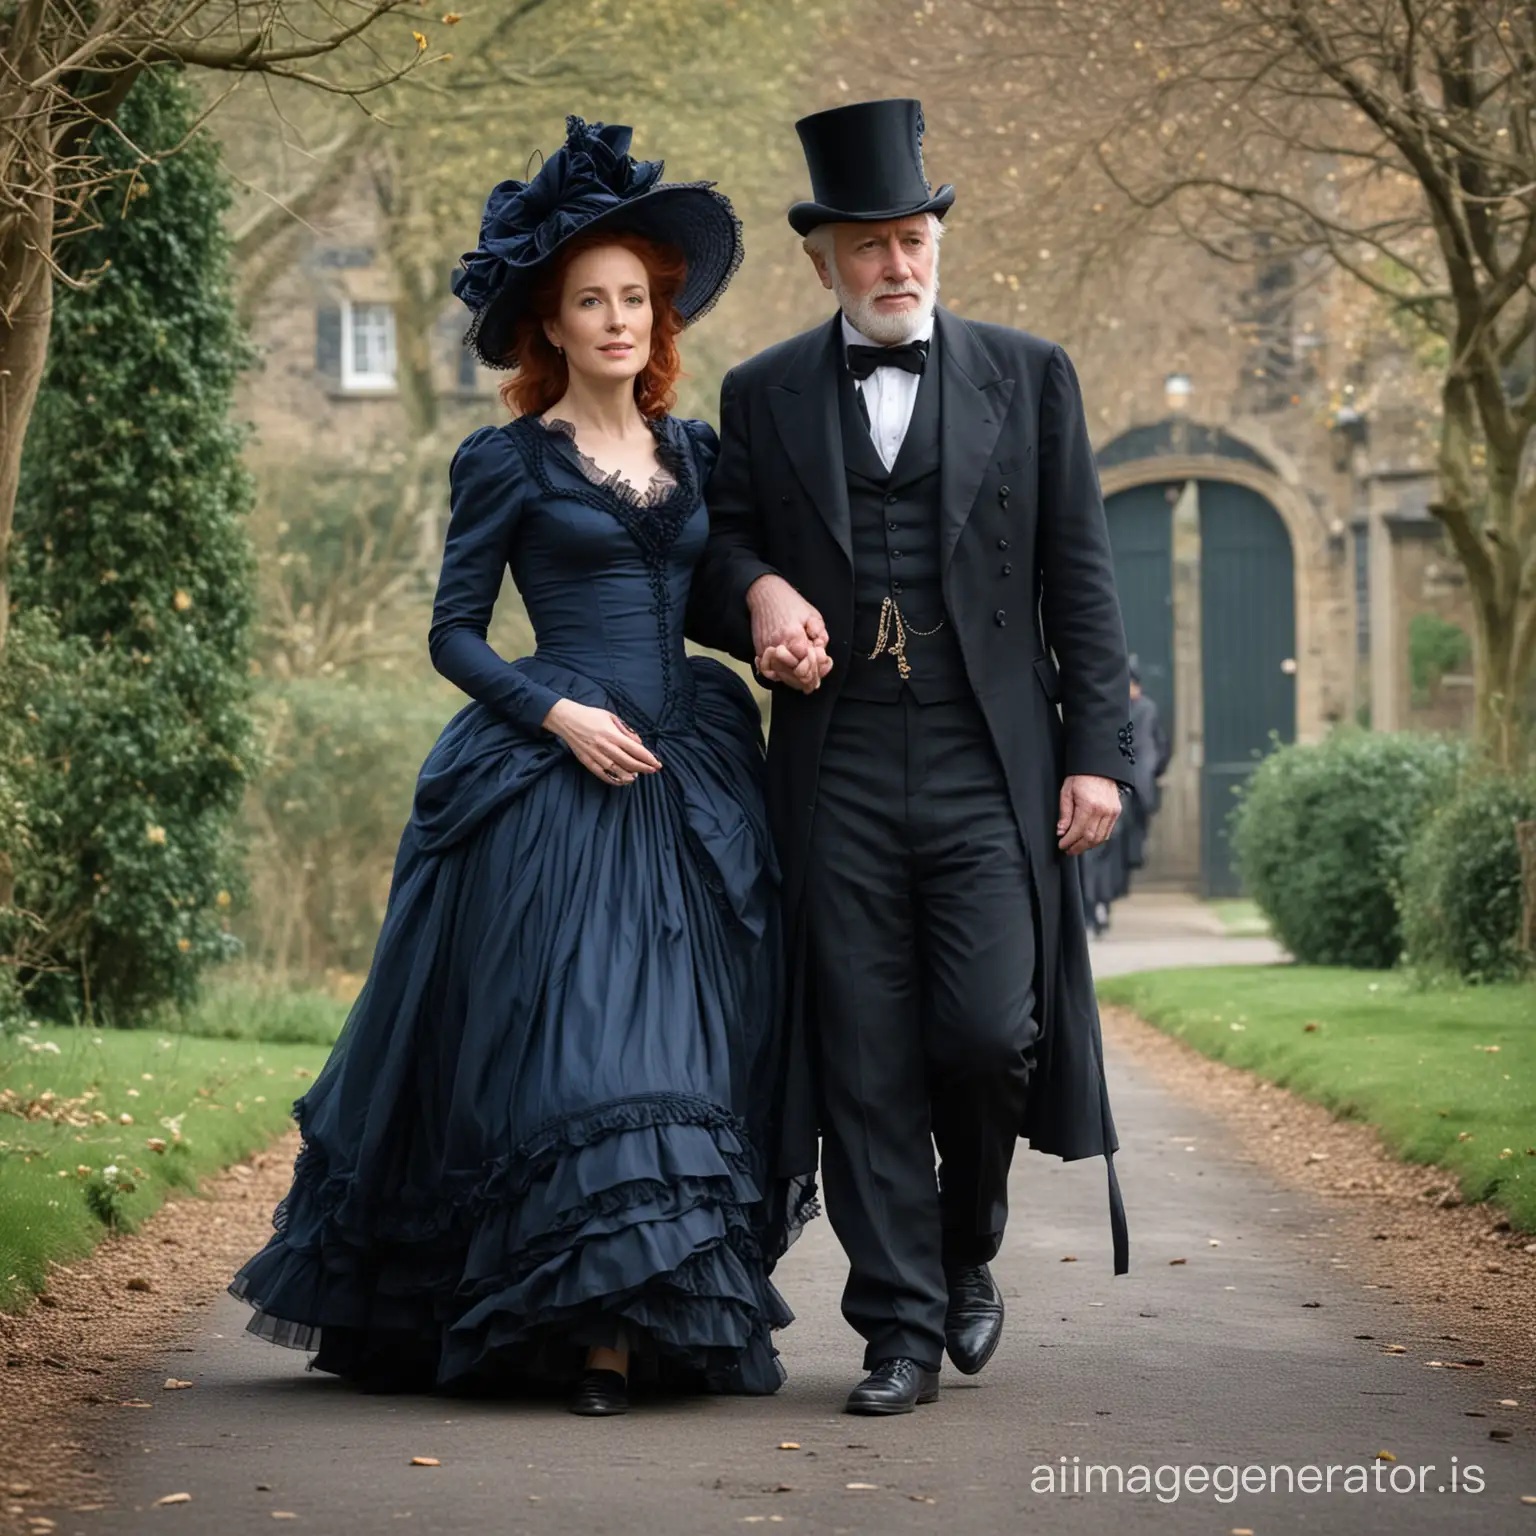 red hair Gillian Anderson wearing a dark blue  floor-length loose billowing 1860 victorian crinoline poofy dress with a frilly bonnet walking with an old man dressed into a black victorian suit who seems to be her newlywed husband
